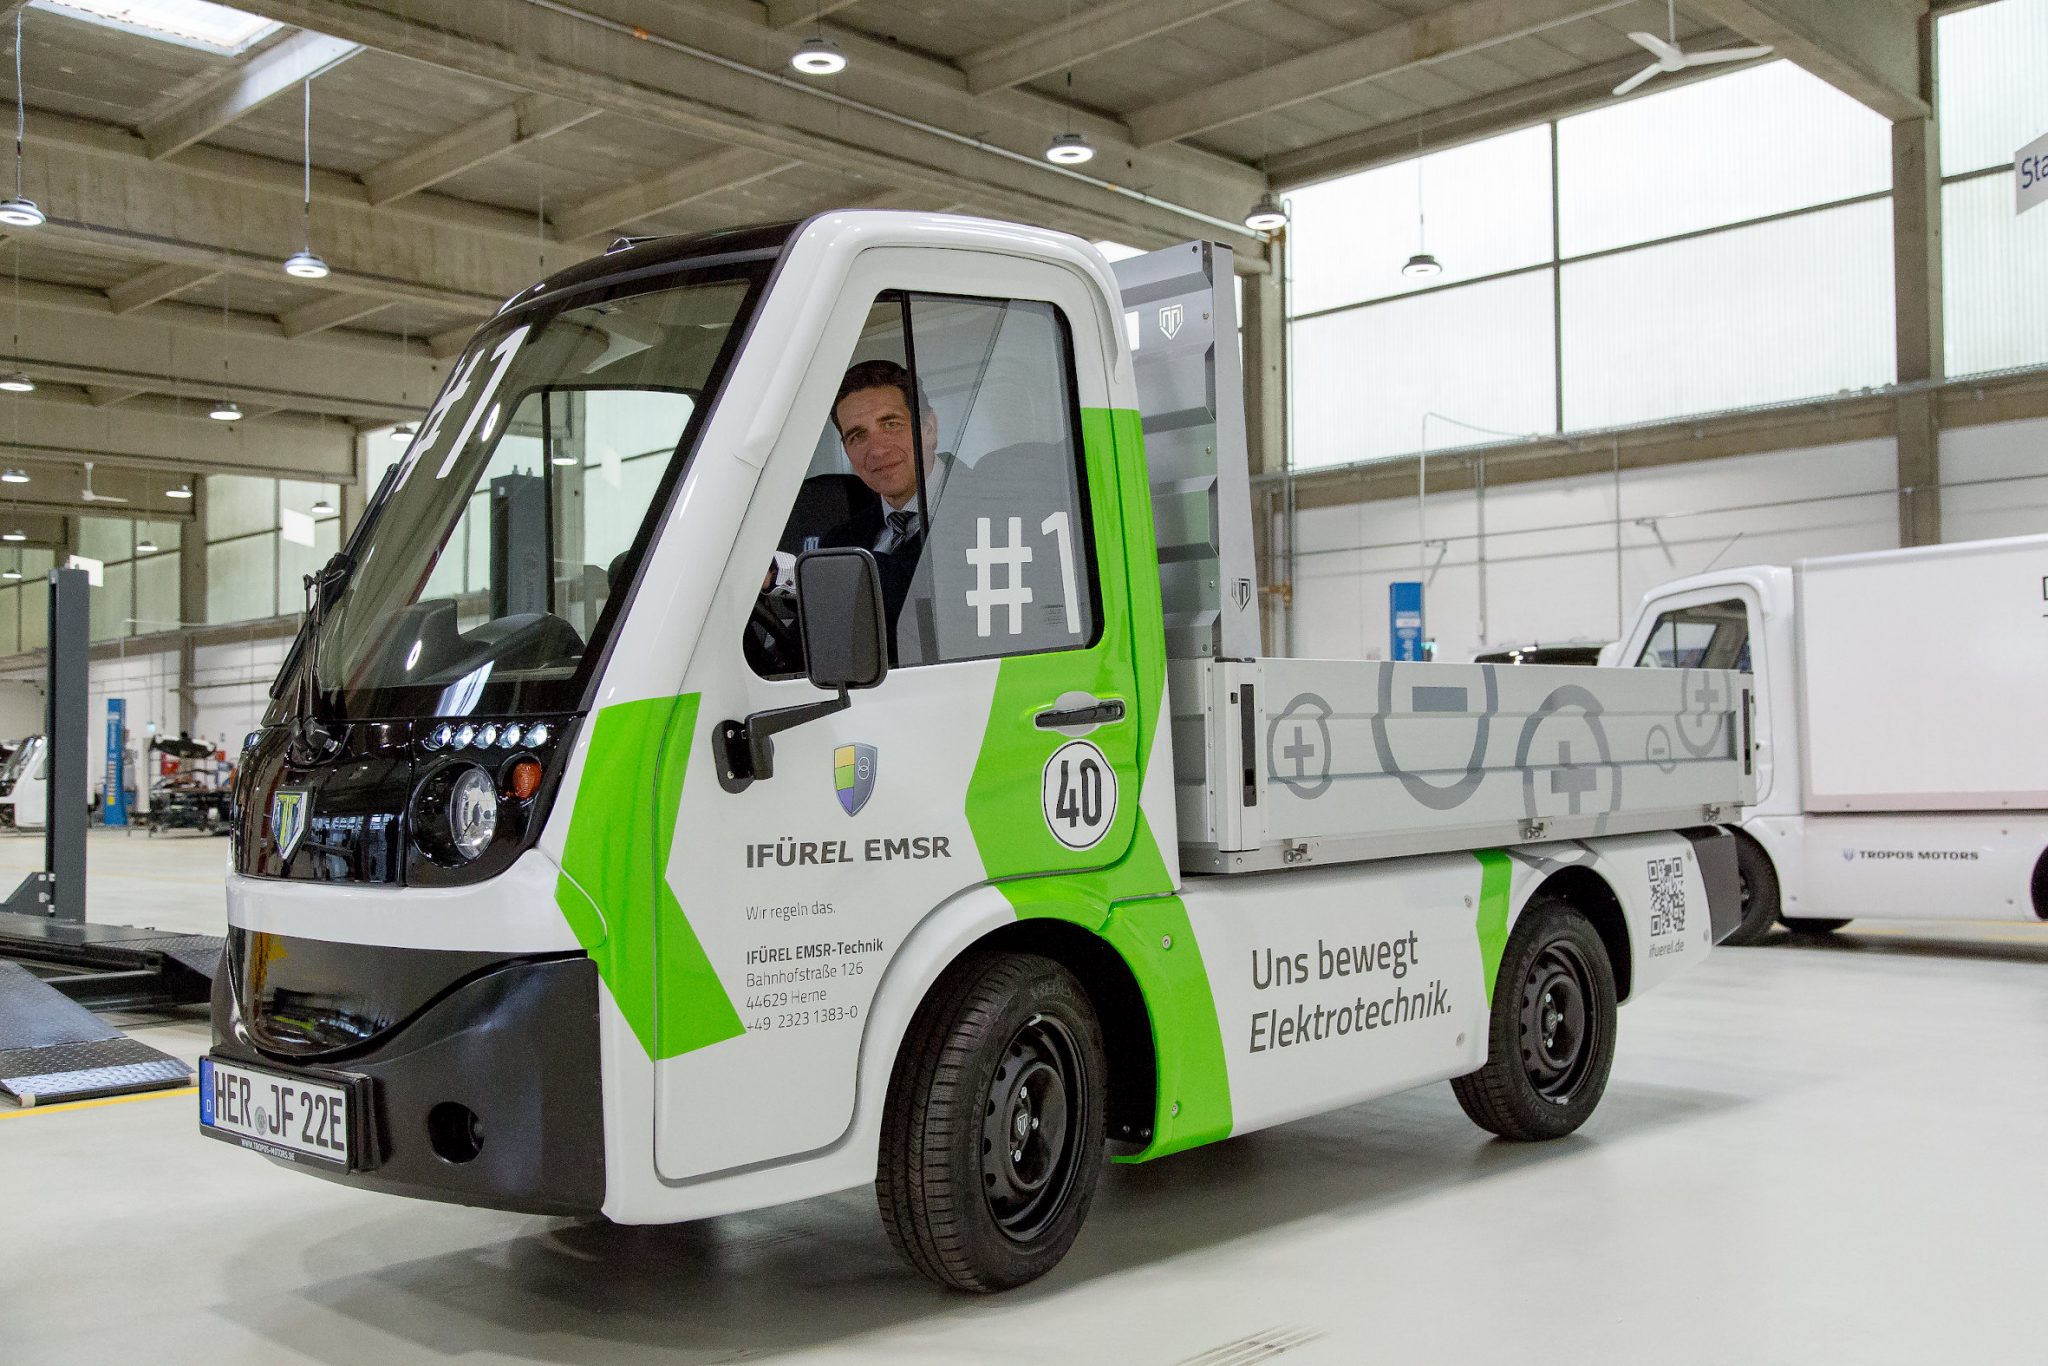 Tropos Hands Over First Electric Utility Vehicle Logistics Business